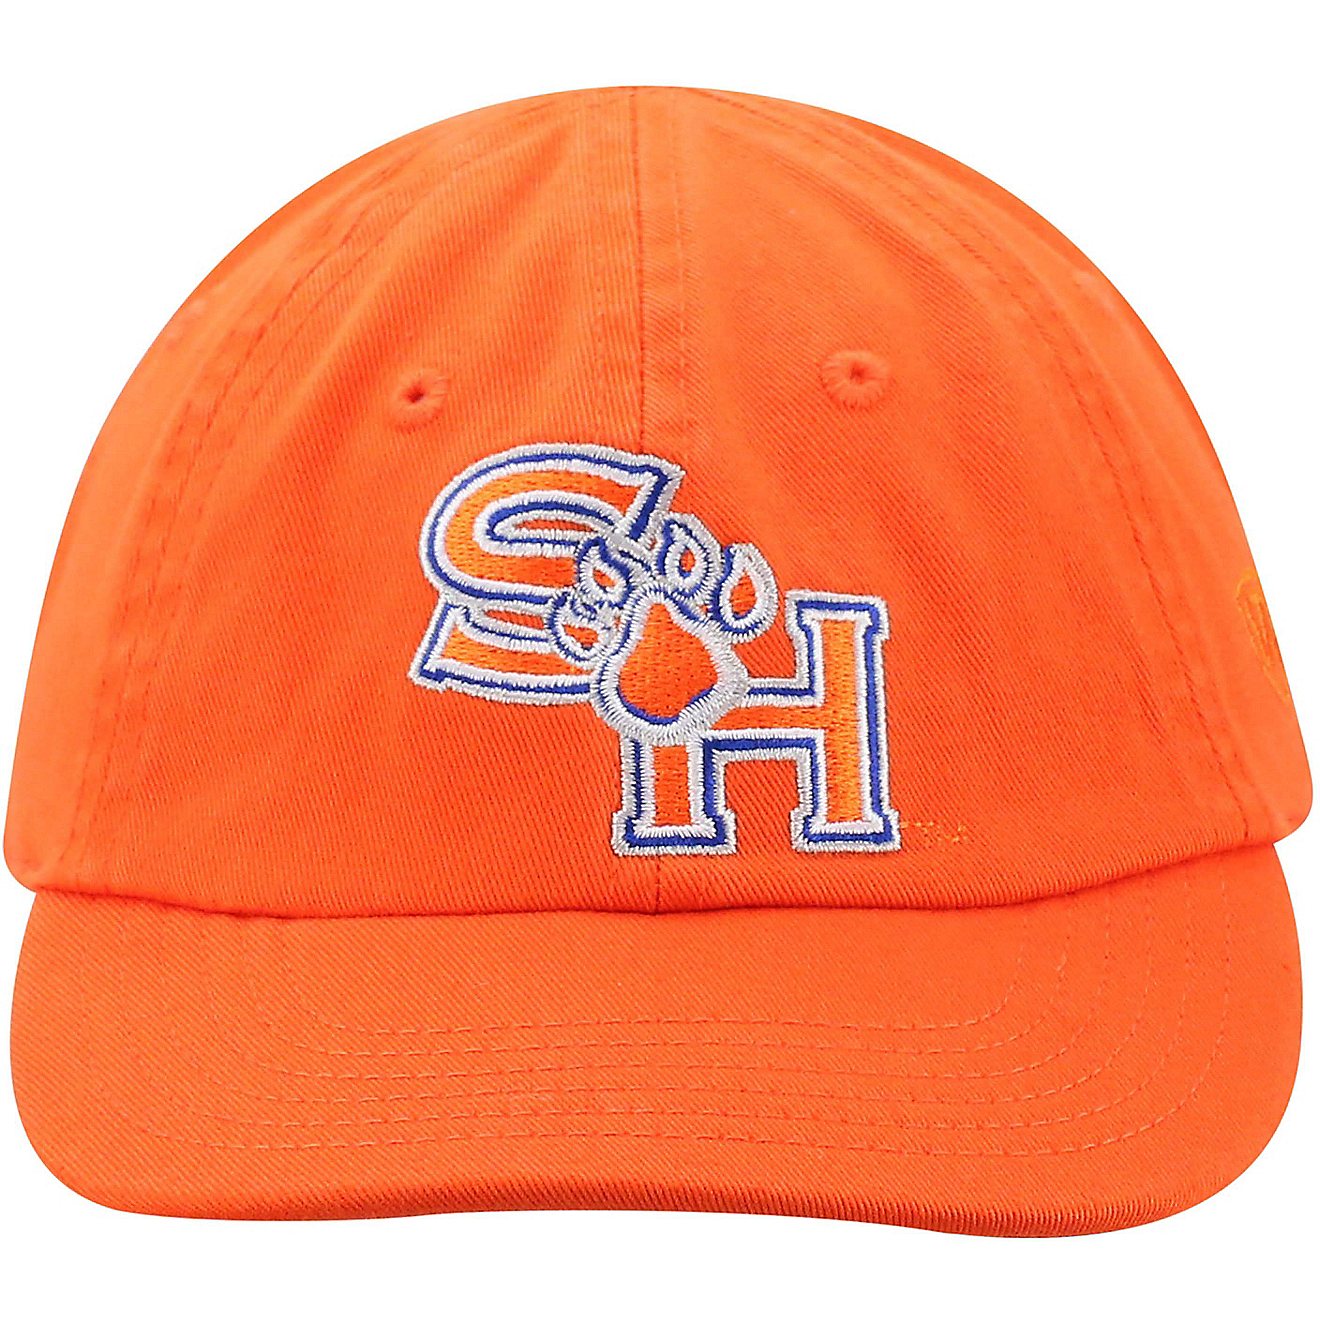 Top of the World Infants' Sam Houston State University Mini Me Cap                                                               - view number 1